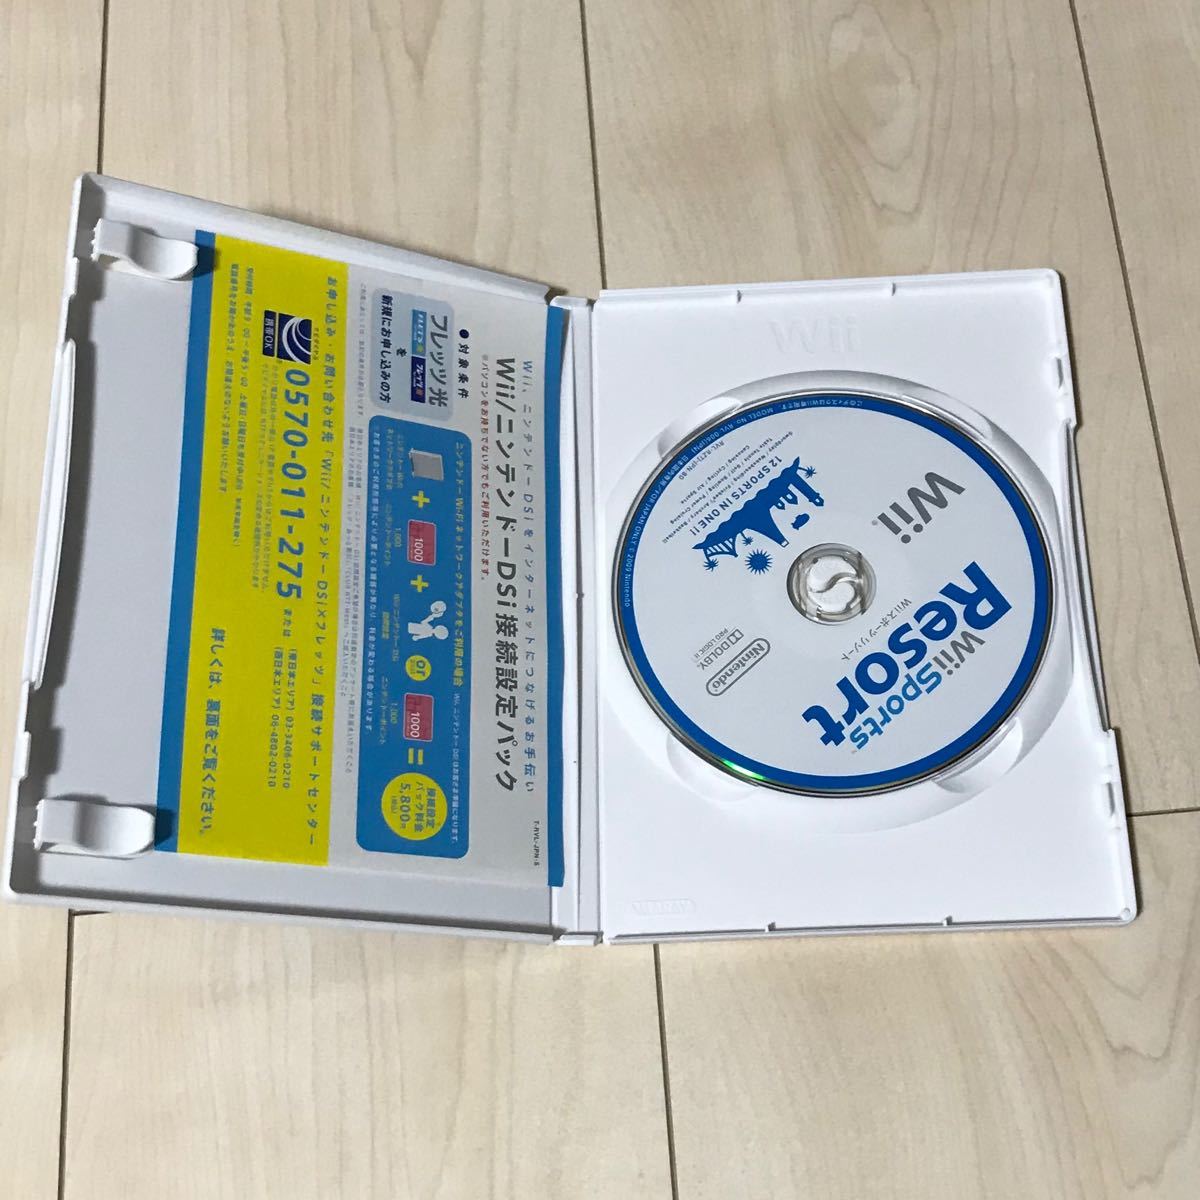 Wii  ソフト　3点セット